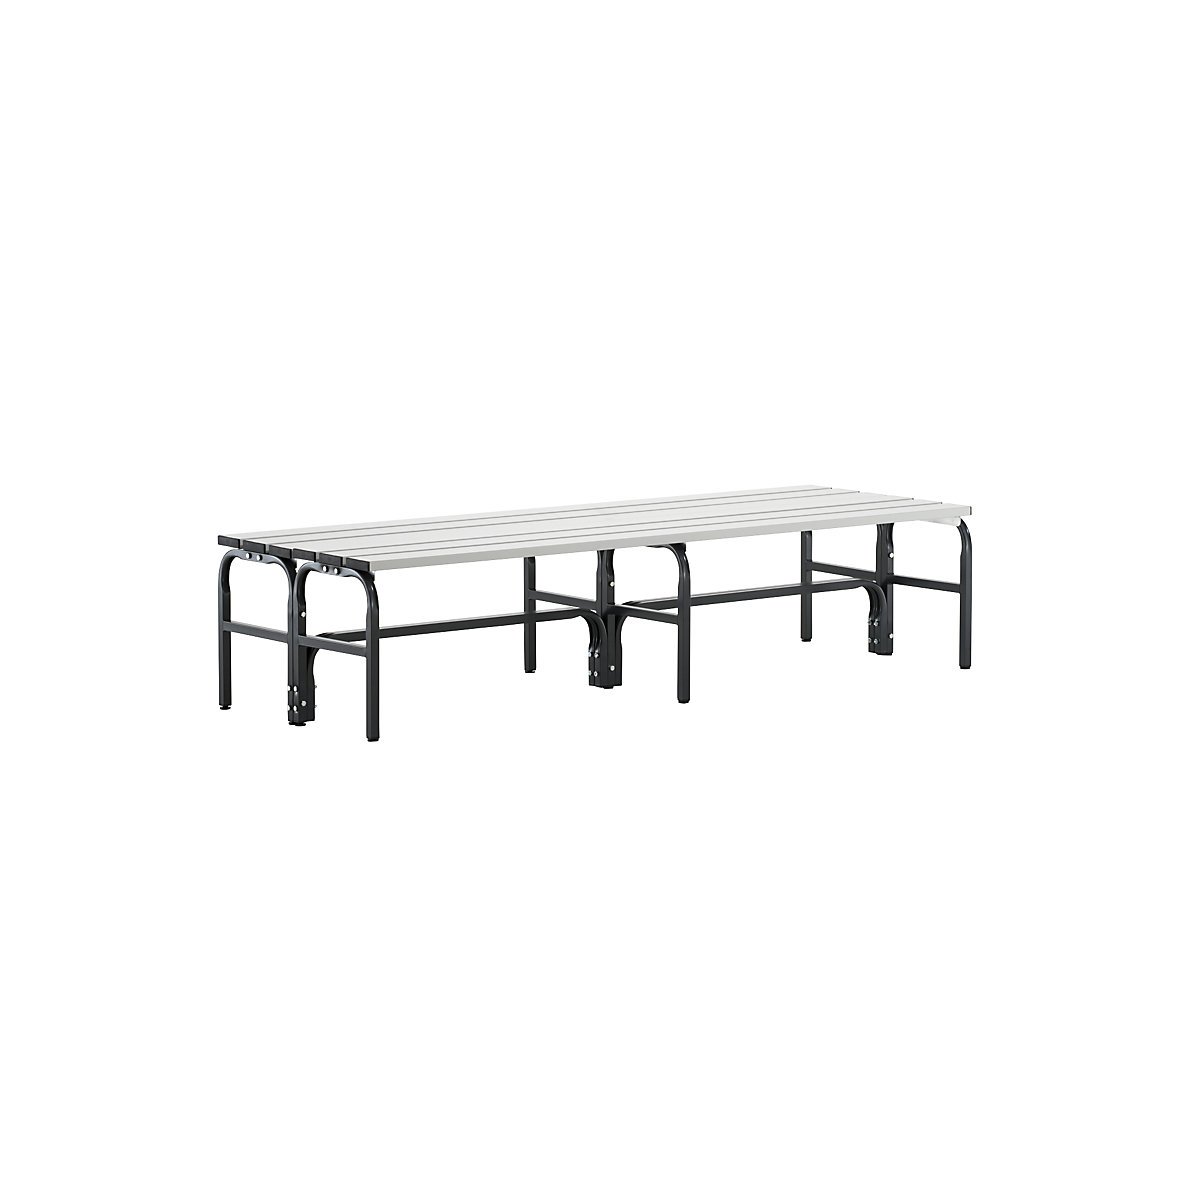 Sypro – Cloakroom bench, double sided, aluminium slats, stainless steel frame, length 1500 mm